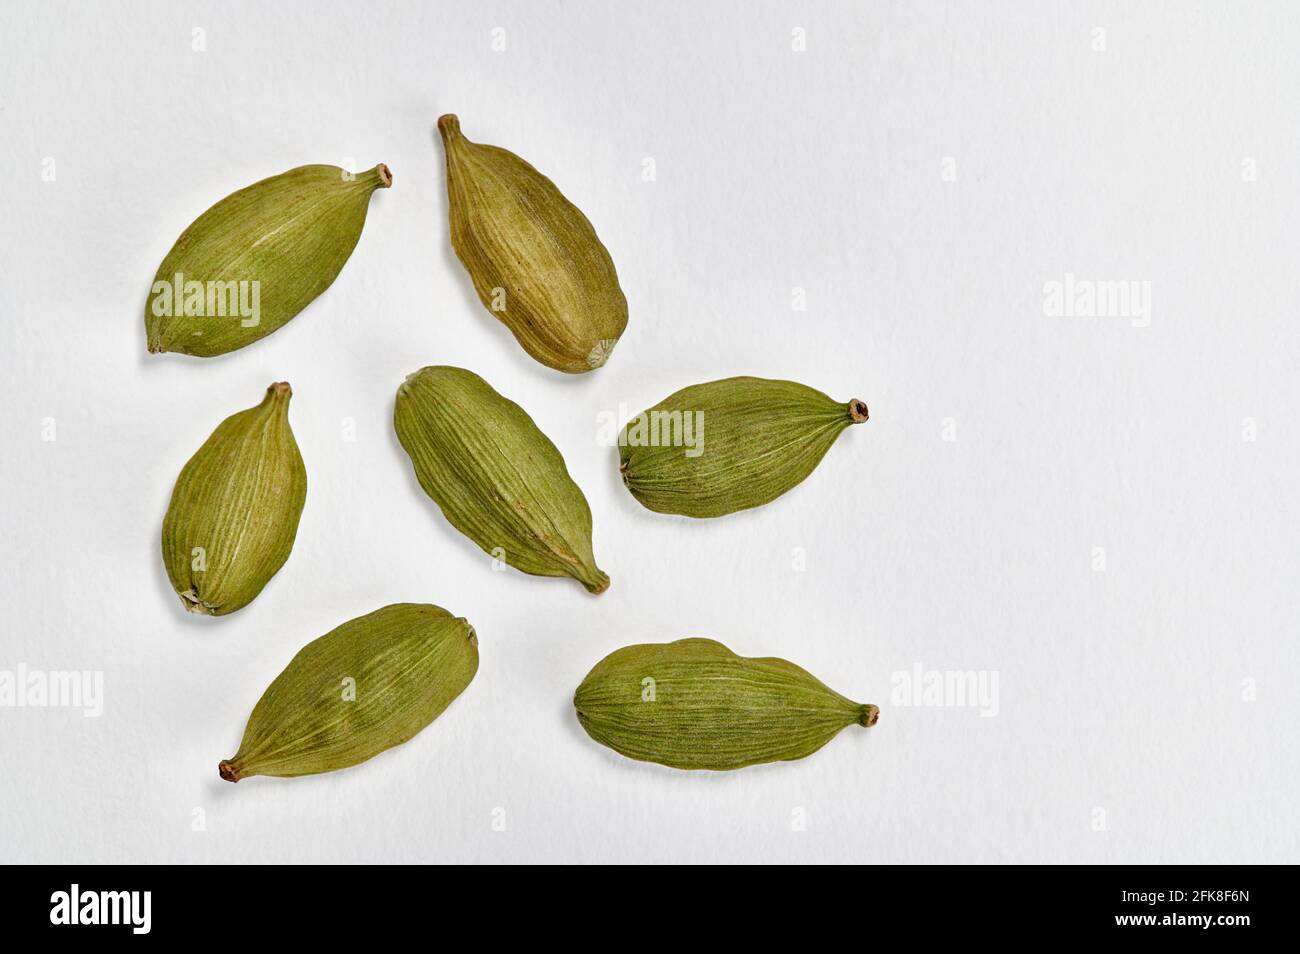 Closeup view of Green cardamom (Elettaria cardamomum) pods on a white background Stock Photo